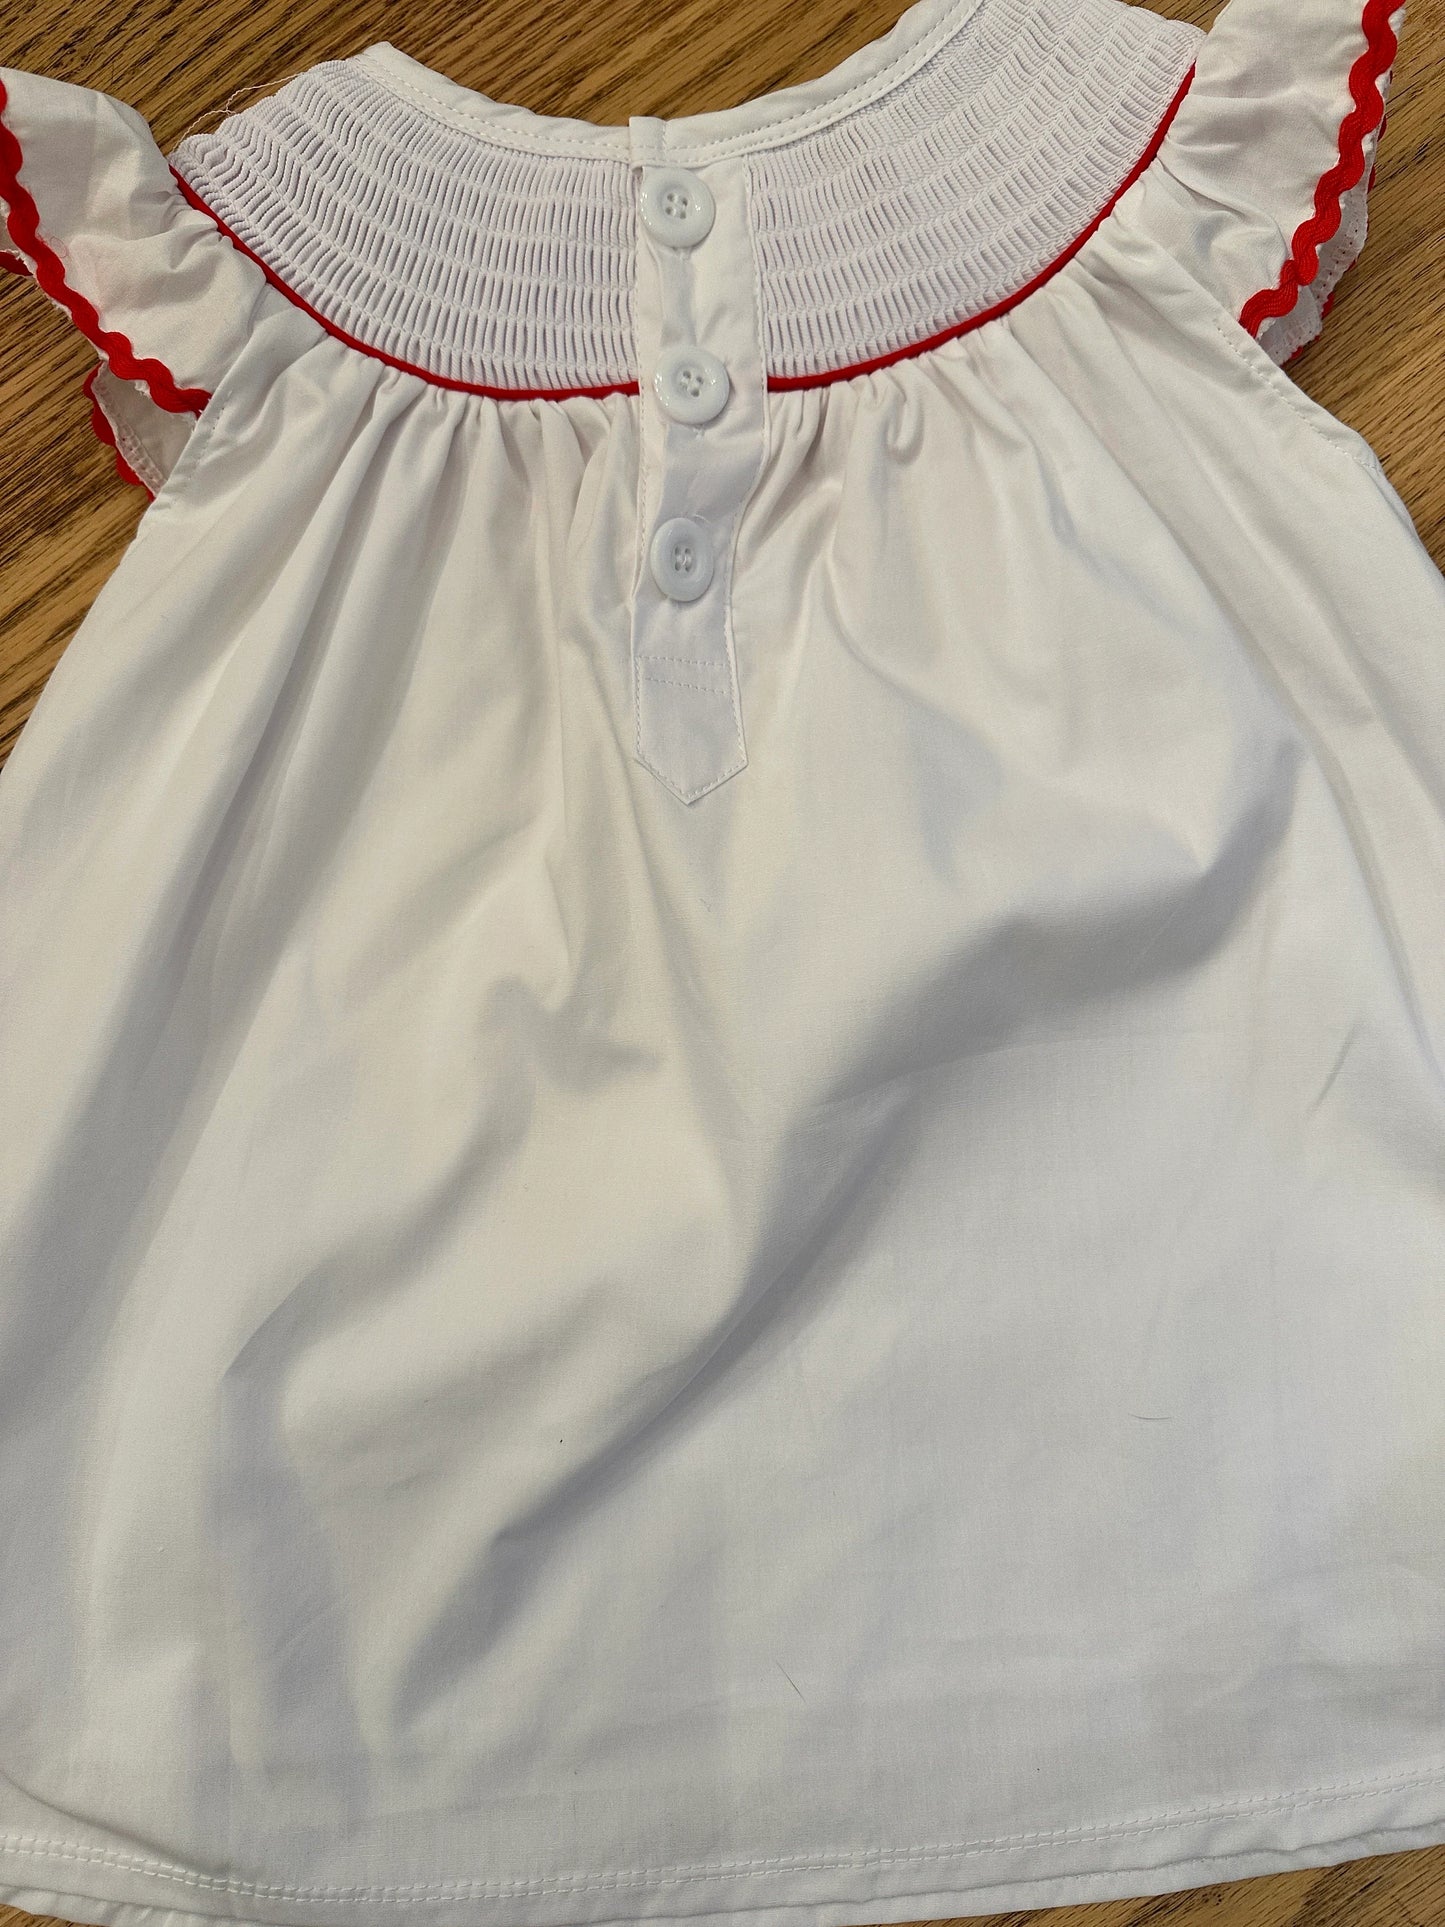 Adorable Fourth of July Smocked Dress with American Flag.